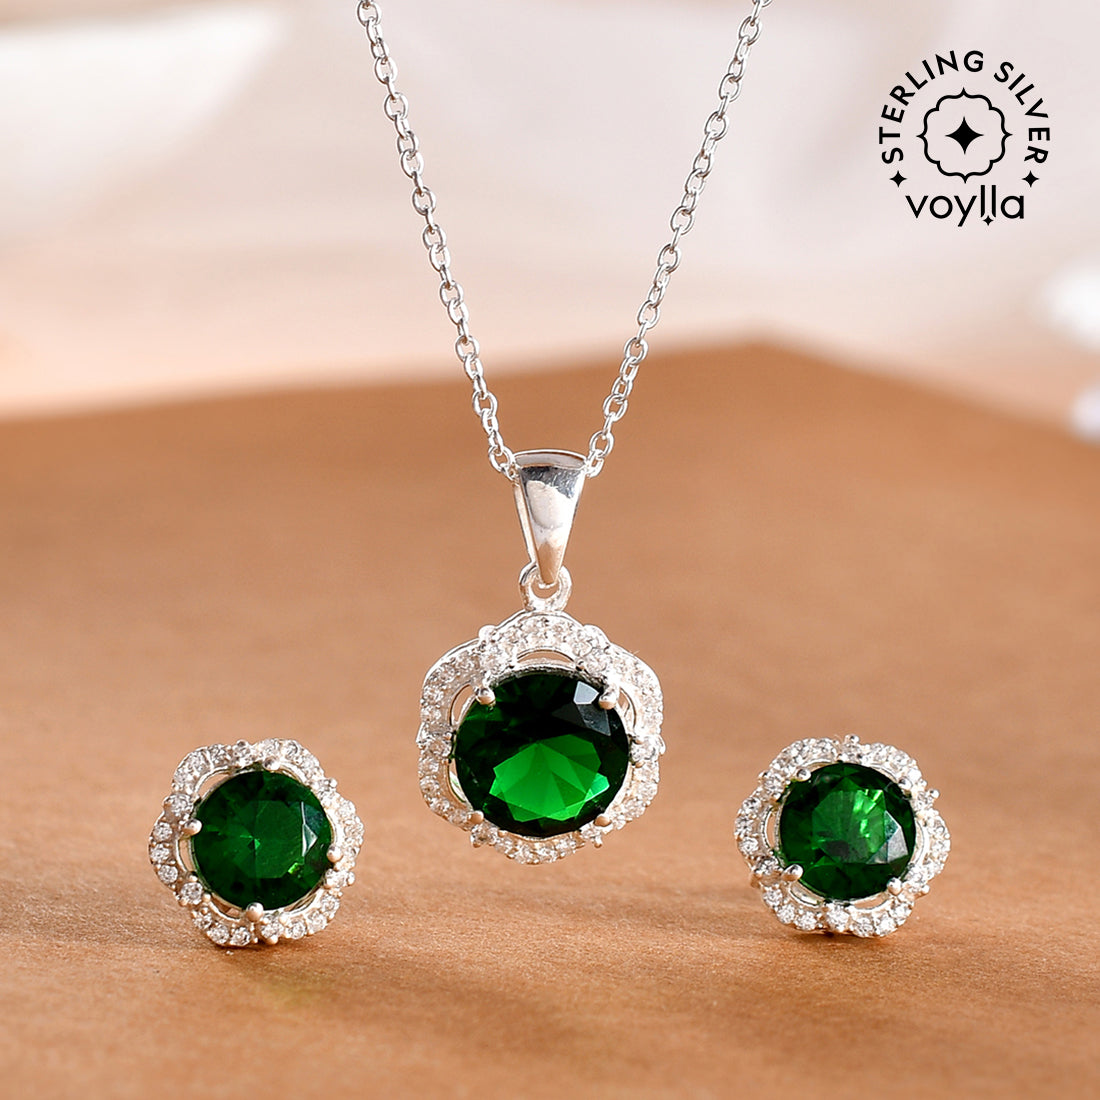 Women's Four Prong Setting Round Cut Emerald Adorned 925 Sterling Silver Pendant Set - Voylla